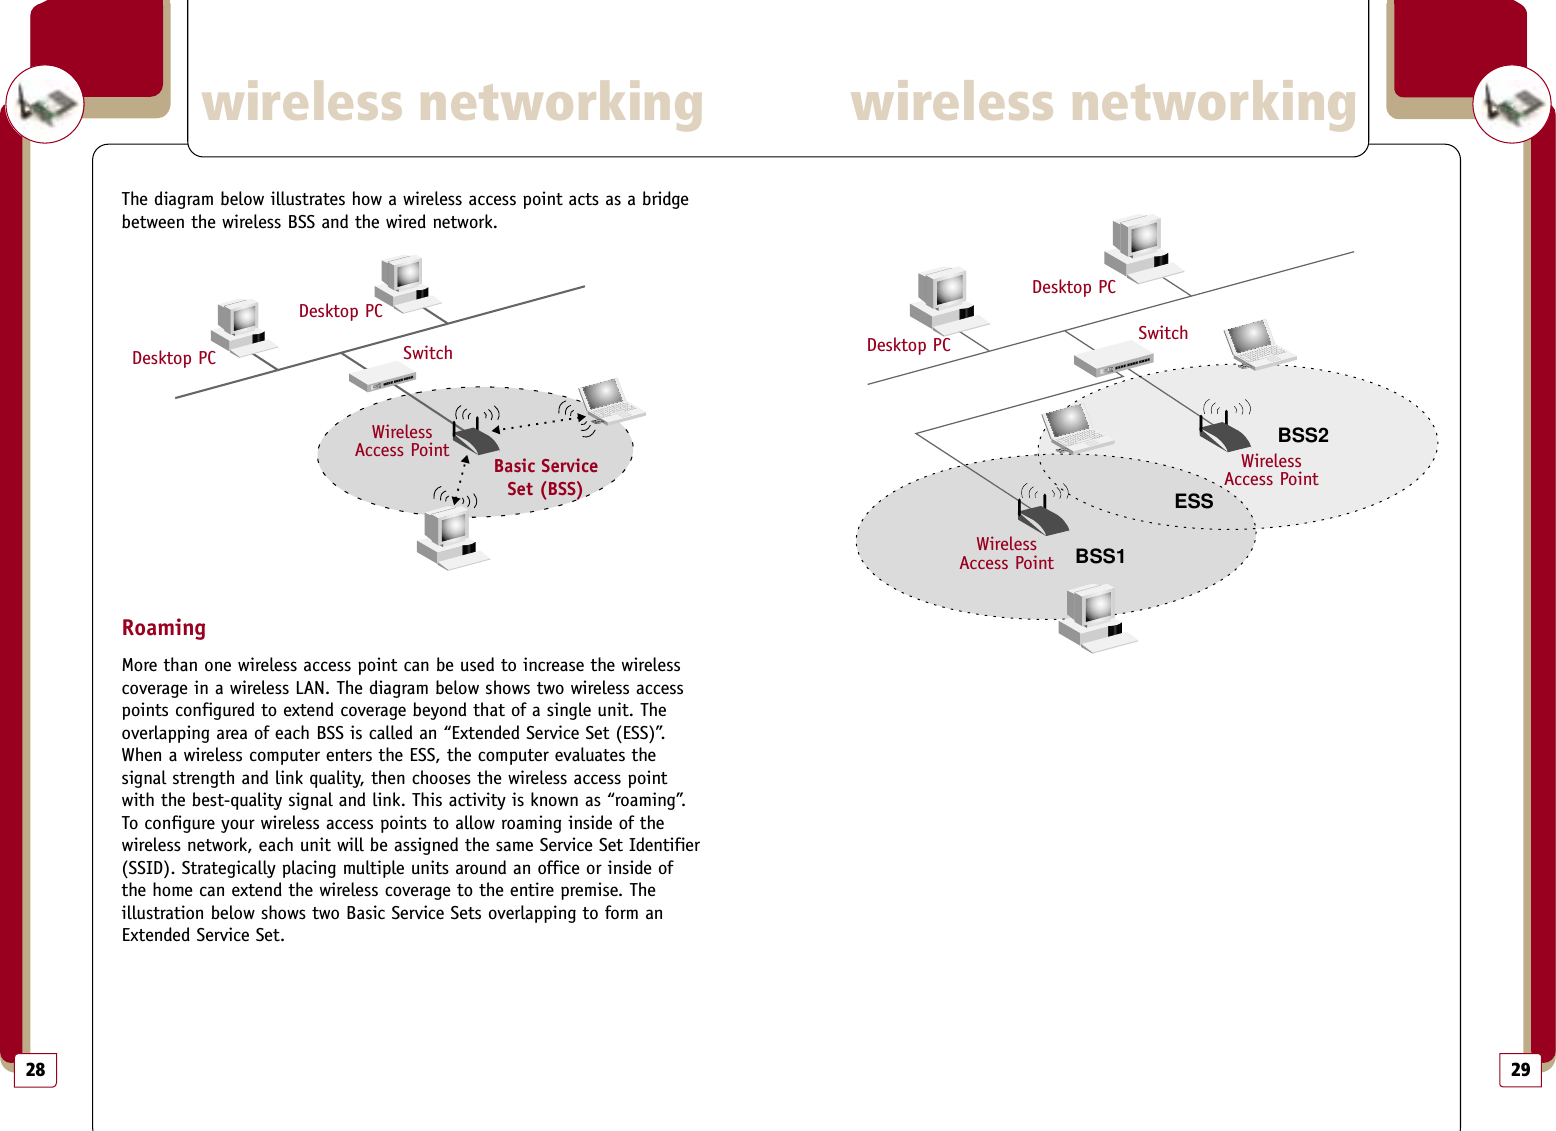 wireless networking28 29wireless networkingESSBSS2BSS1The diagram below illustrates how a wireless access point acts as a bridgebetween the wireless BSS and the wired network.RoamingMore than one wireless access point can be used to increase the wirelesscoverage in a wireless LAN. The diagram below shows two wireless accesspoints configured to extend coverage beyond that of a single unit. Theoverlapping area of each BSS is called an “Extended Service Set (ESS)”.When a wireless computer enters the ESS, the computer evaluates the signal strength and link quality, then chooses the wireless access pointwith the best-quality signal and link. This activity is known as “roaming”.To configure your wireless access points to allow roaming inside of thewireless network, each unit will be assigned the same Service Set Identifier(SSID). Strategically placing multiple units around an office or inside ofthe home can extend the wireless coverage to the entire premise. The illustration below shows two Basic Service Sets overlapping to form anExtended Service Set.Basic ServiceSet (BSS)WirelessAccess PointDesktop PCDesktop PCSwitchWirelessAccess PointDesktop PCDesktop PCSwitchWirelessAccess Point